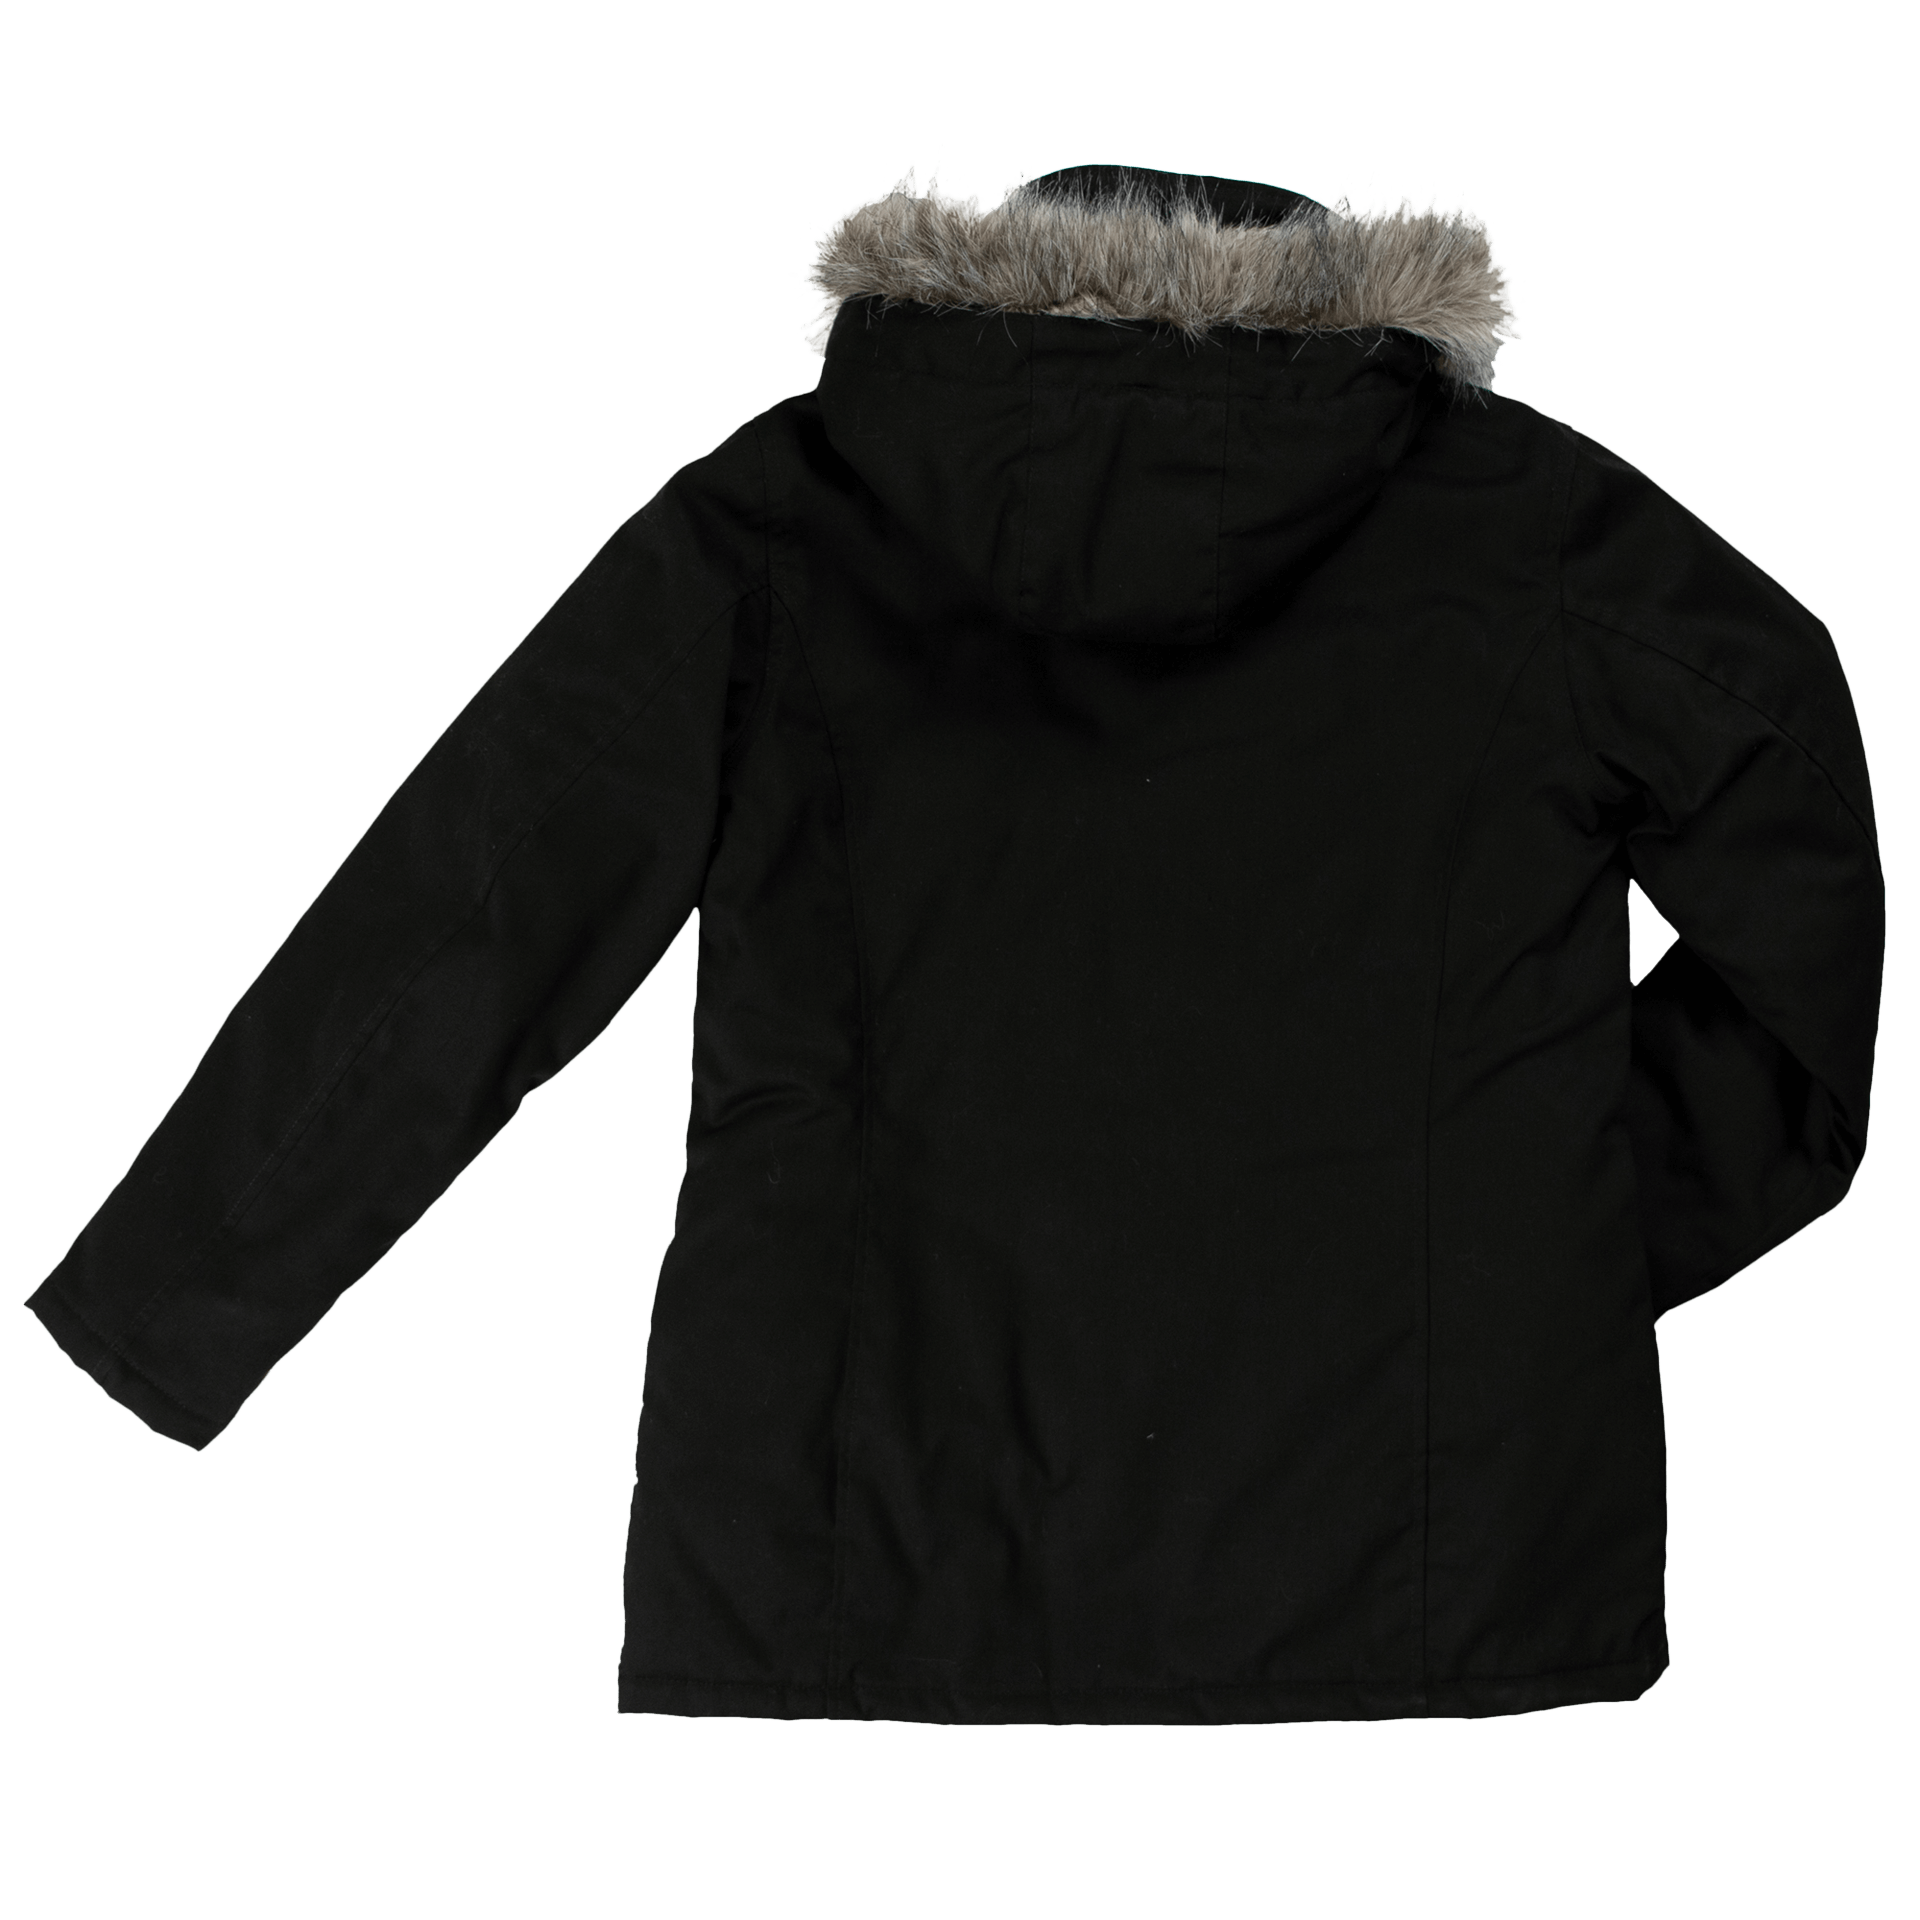 Tough Duck Women's Winter Work Hydro Parka WJ10 10 oz Premium Sanded Duck Detachable Hood Insulated Black | Limited Size Selection